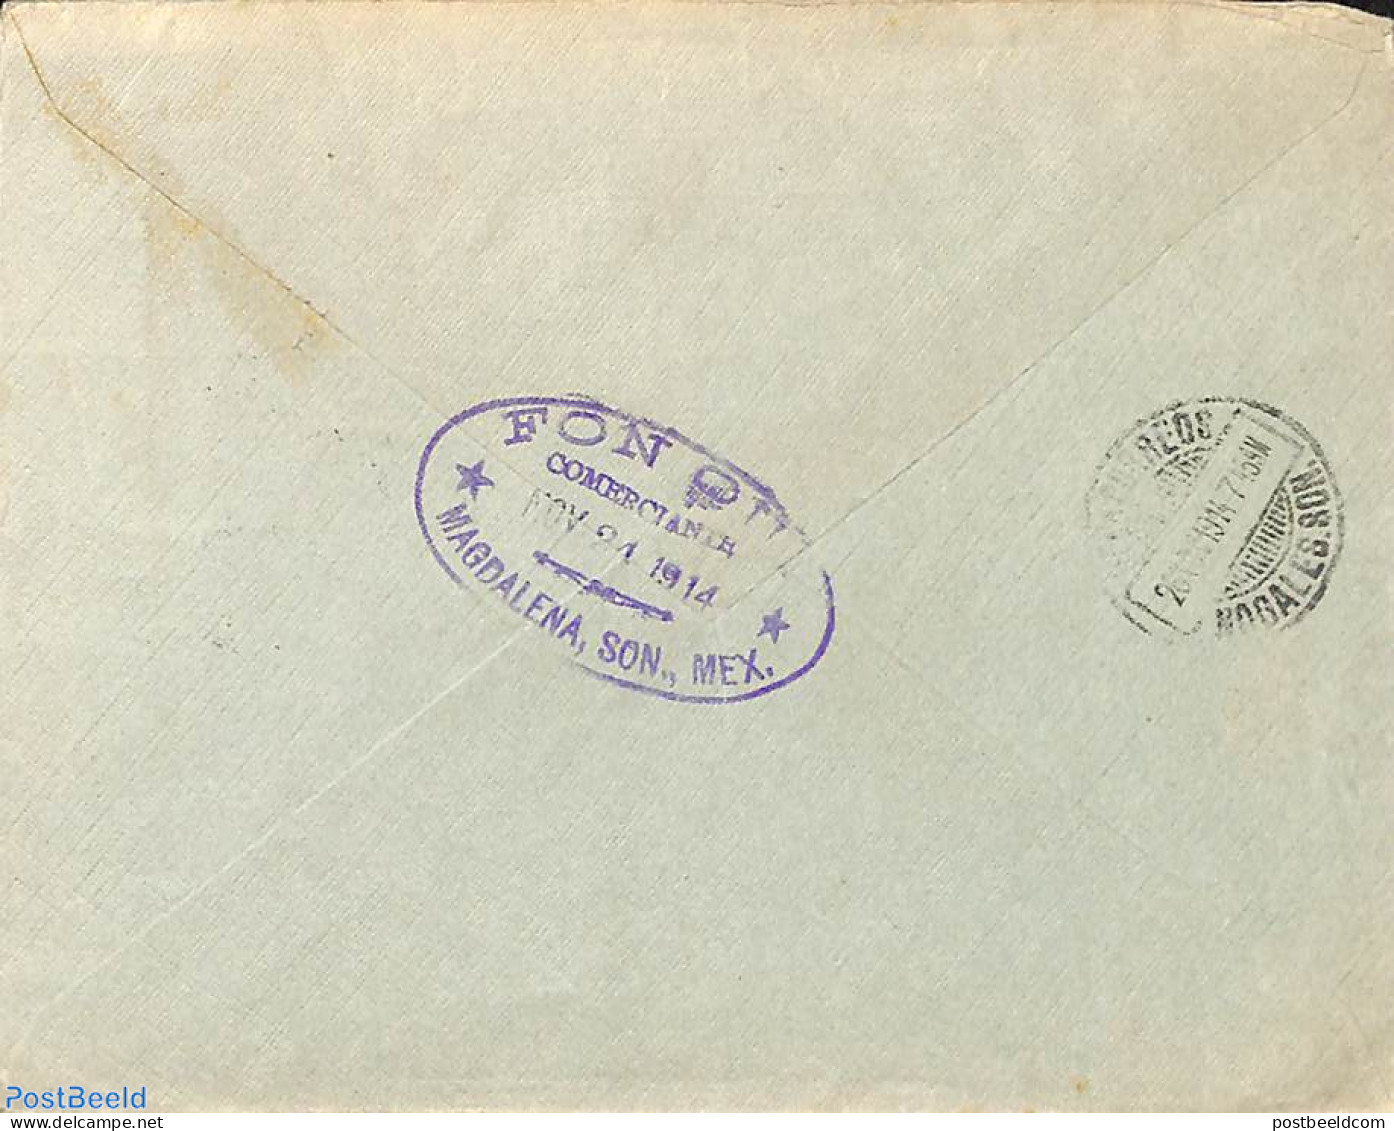 Mexico 1914 Letter With 5c SONORA Stamp, Postal History - México